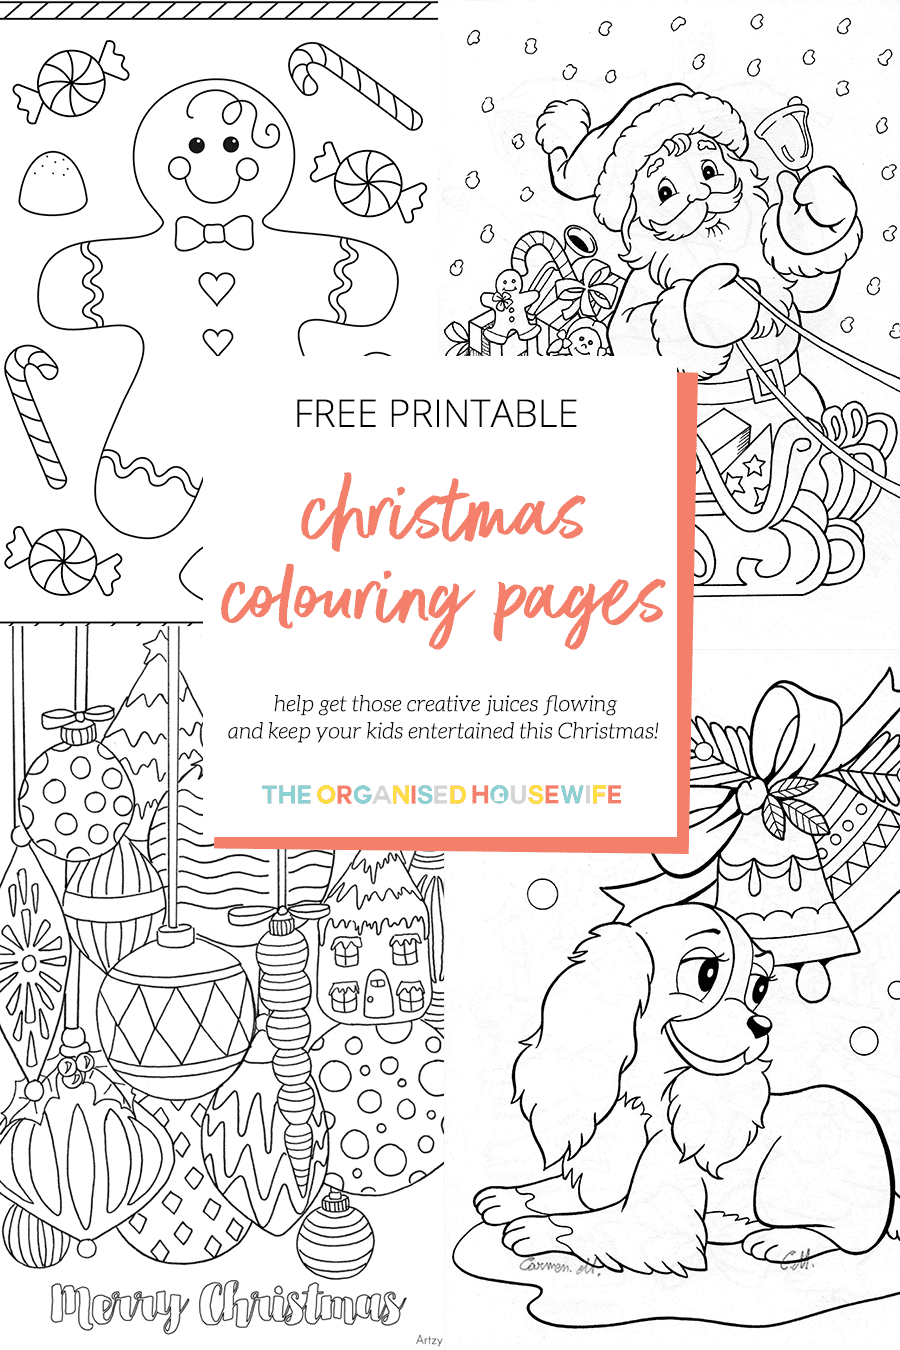 Free printable Christmas Colouring Pages